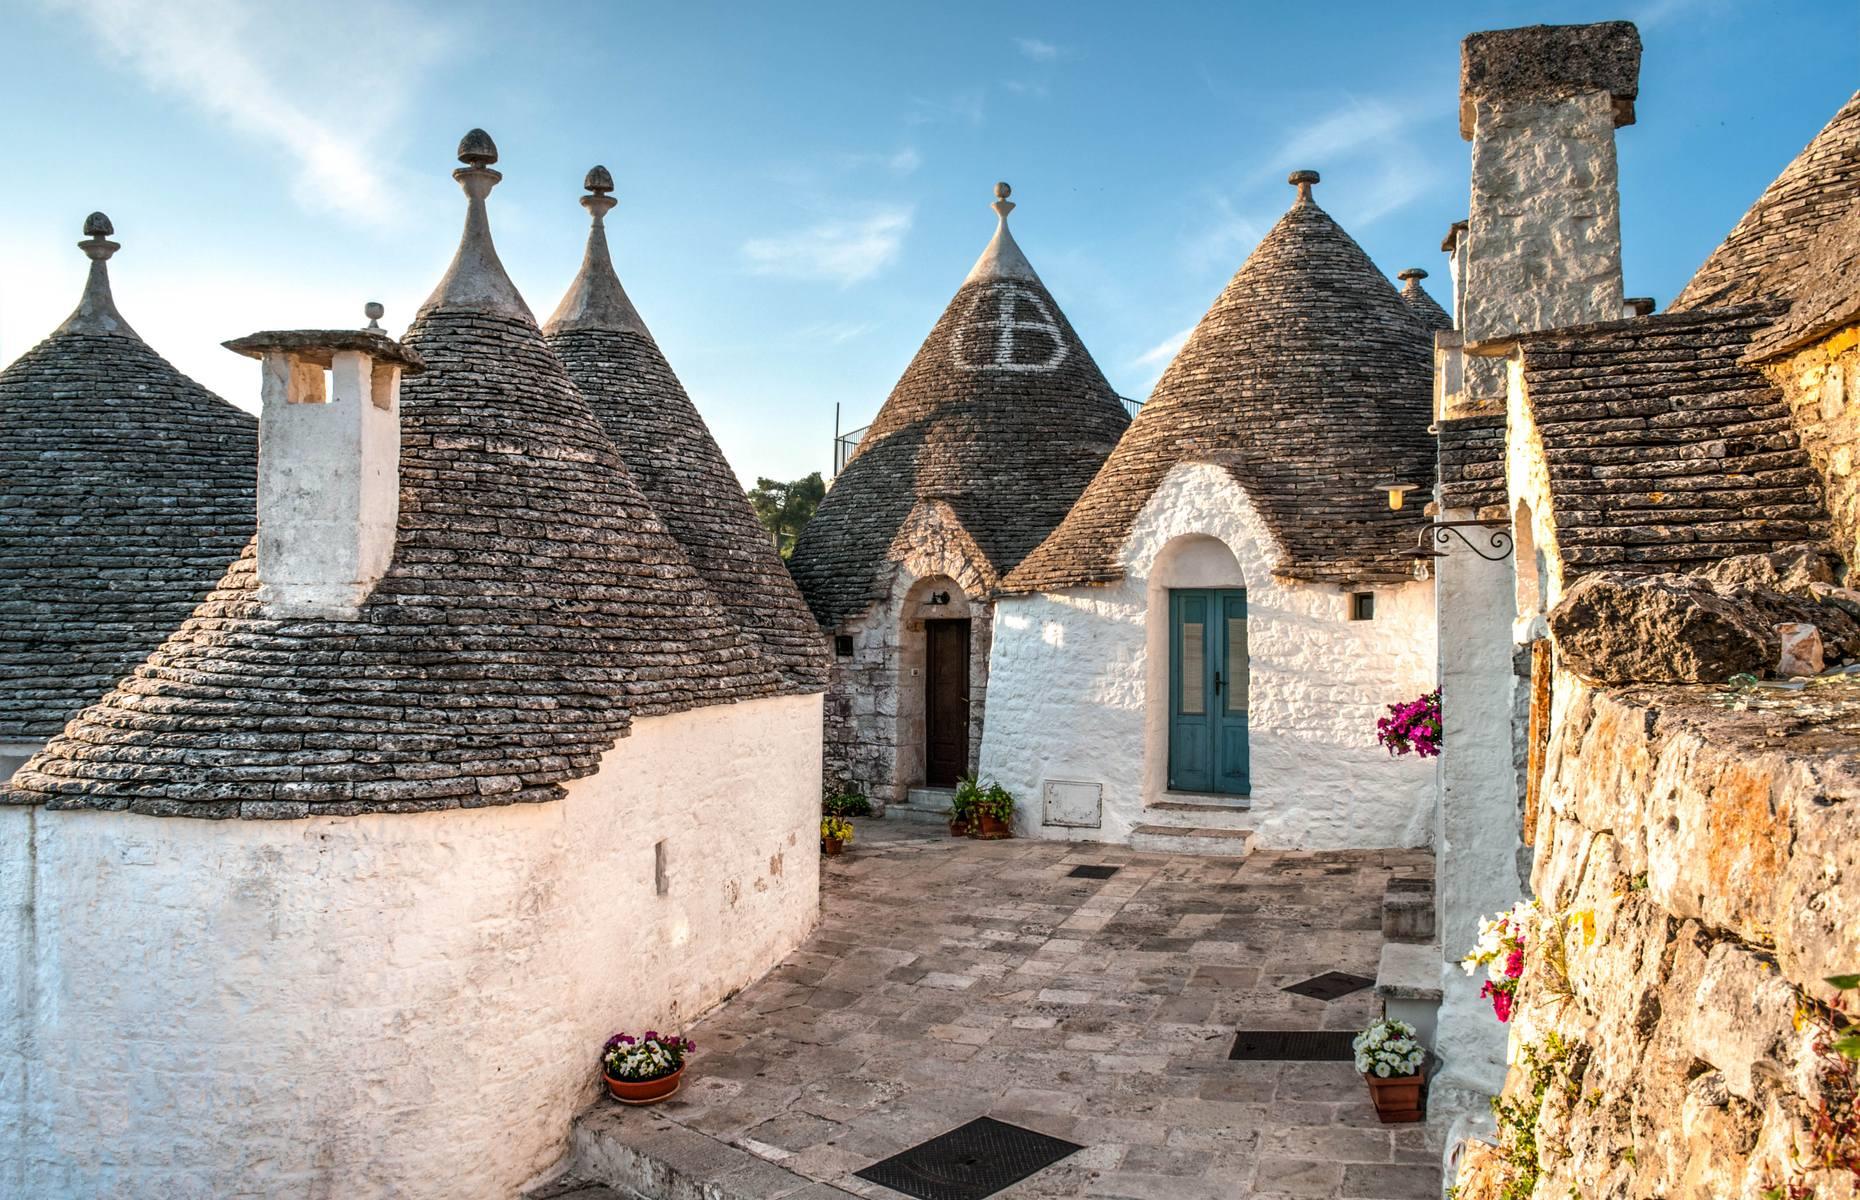 The conical-roofed, whitewashed houses of Albarello look like they’d be better suited to mythical creatures than human beings. Located in southern Italy’s Puglia region, just at the top of the boot’s heel, the town is best known for these traditional trulli buildings today. They were constructed from local limestone using a prehistoric building technique, with the oldest ones dating back to the 14th century.